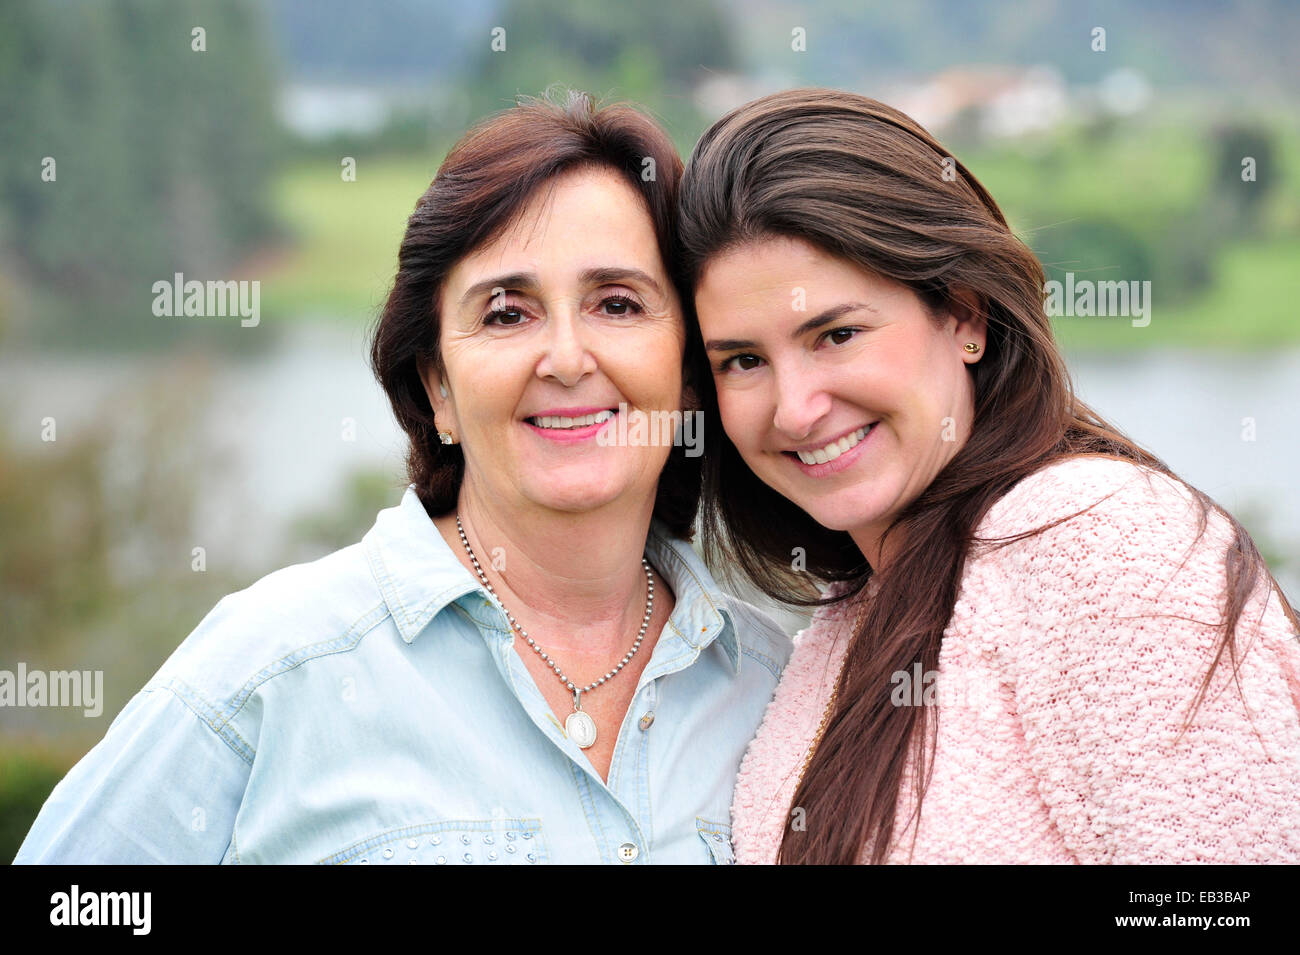 Hispanic mother and daughter smiling together Stock Photo